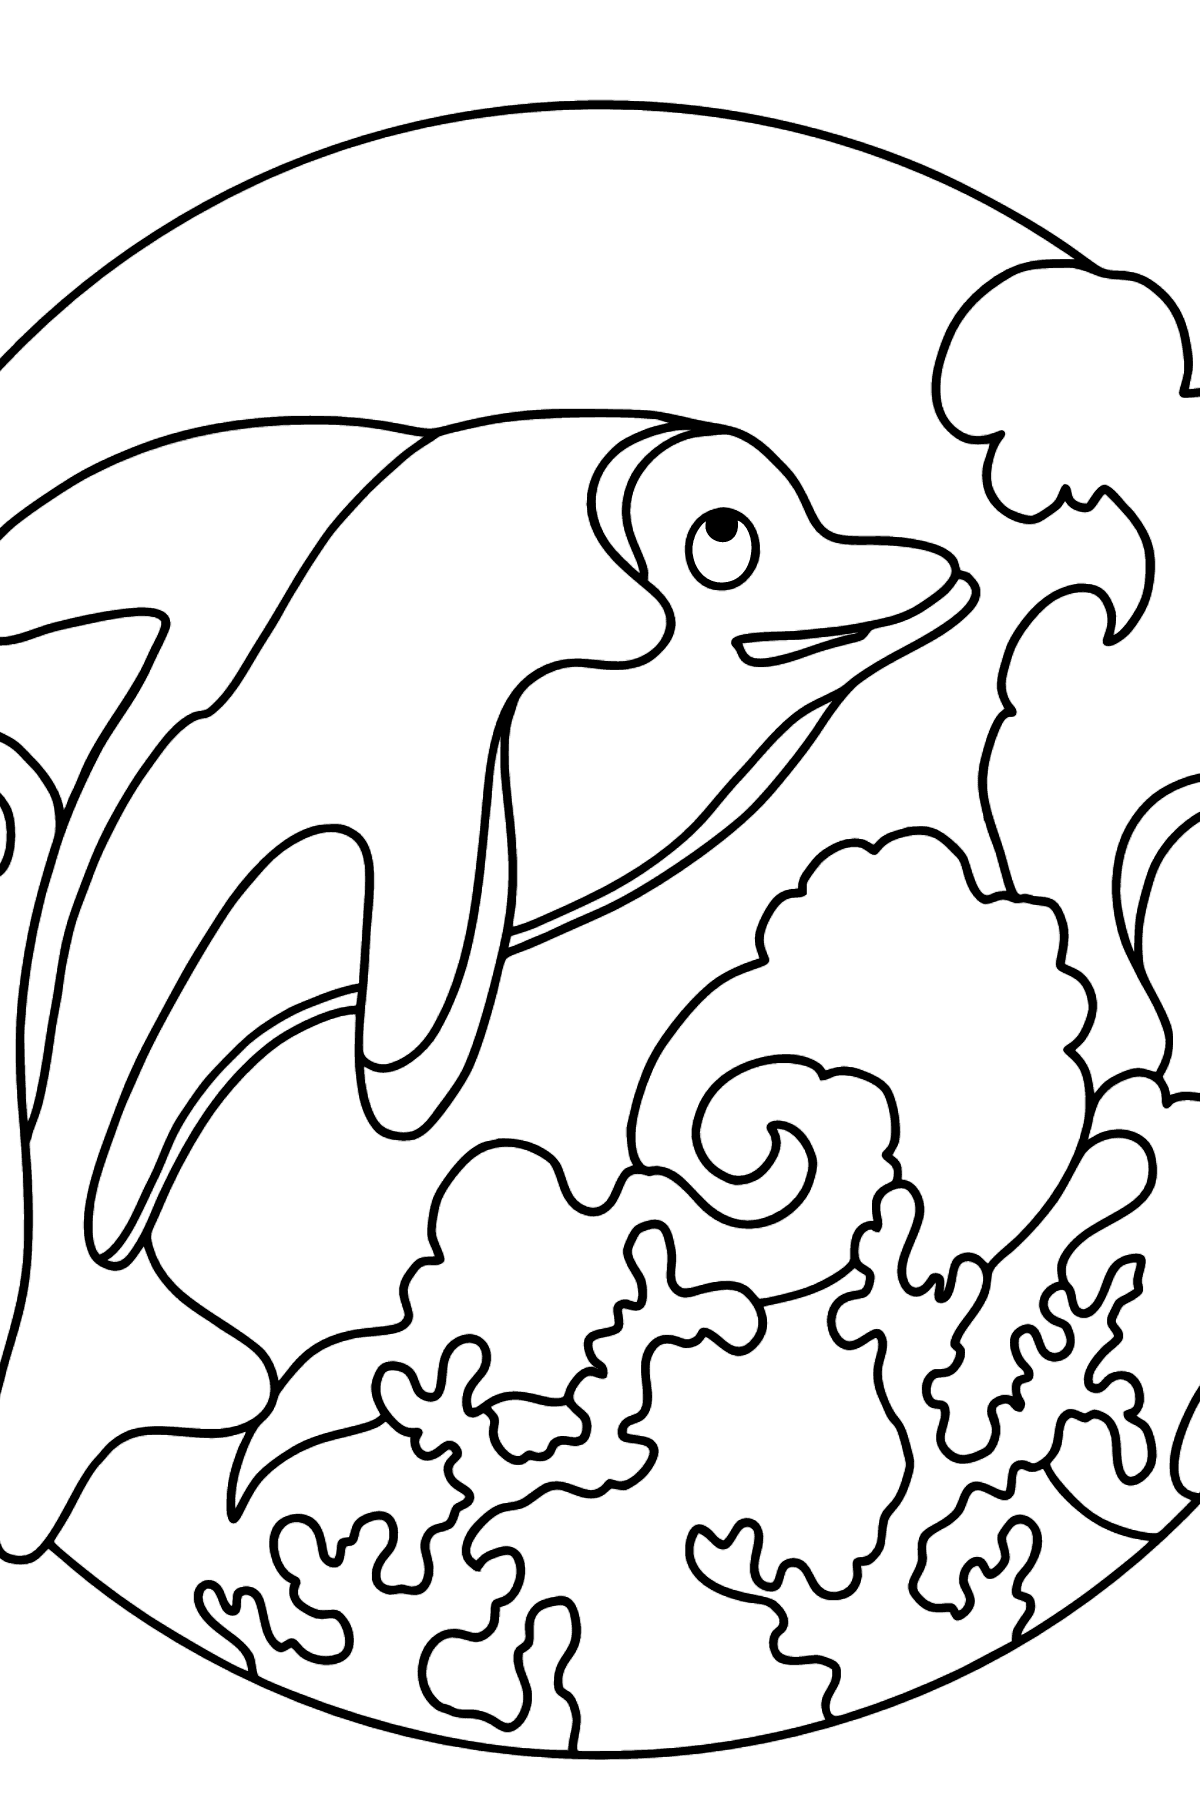 Coloring Page - A Dolphin, an Agile and Fast Predator - Coloring Pages for Kids